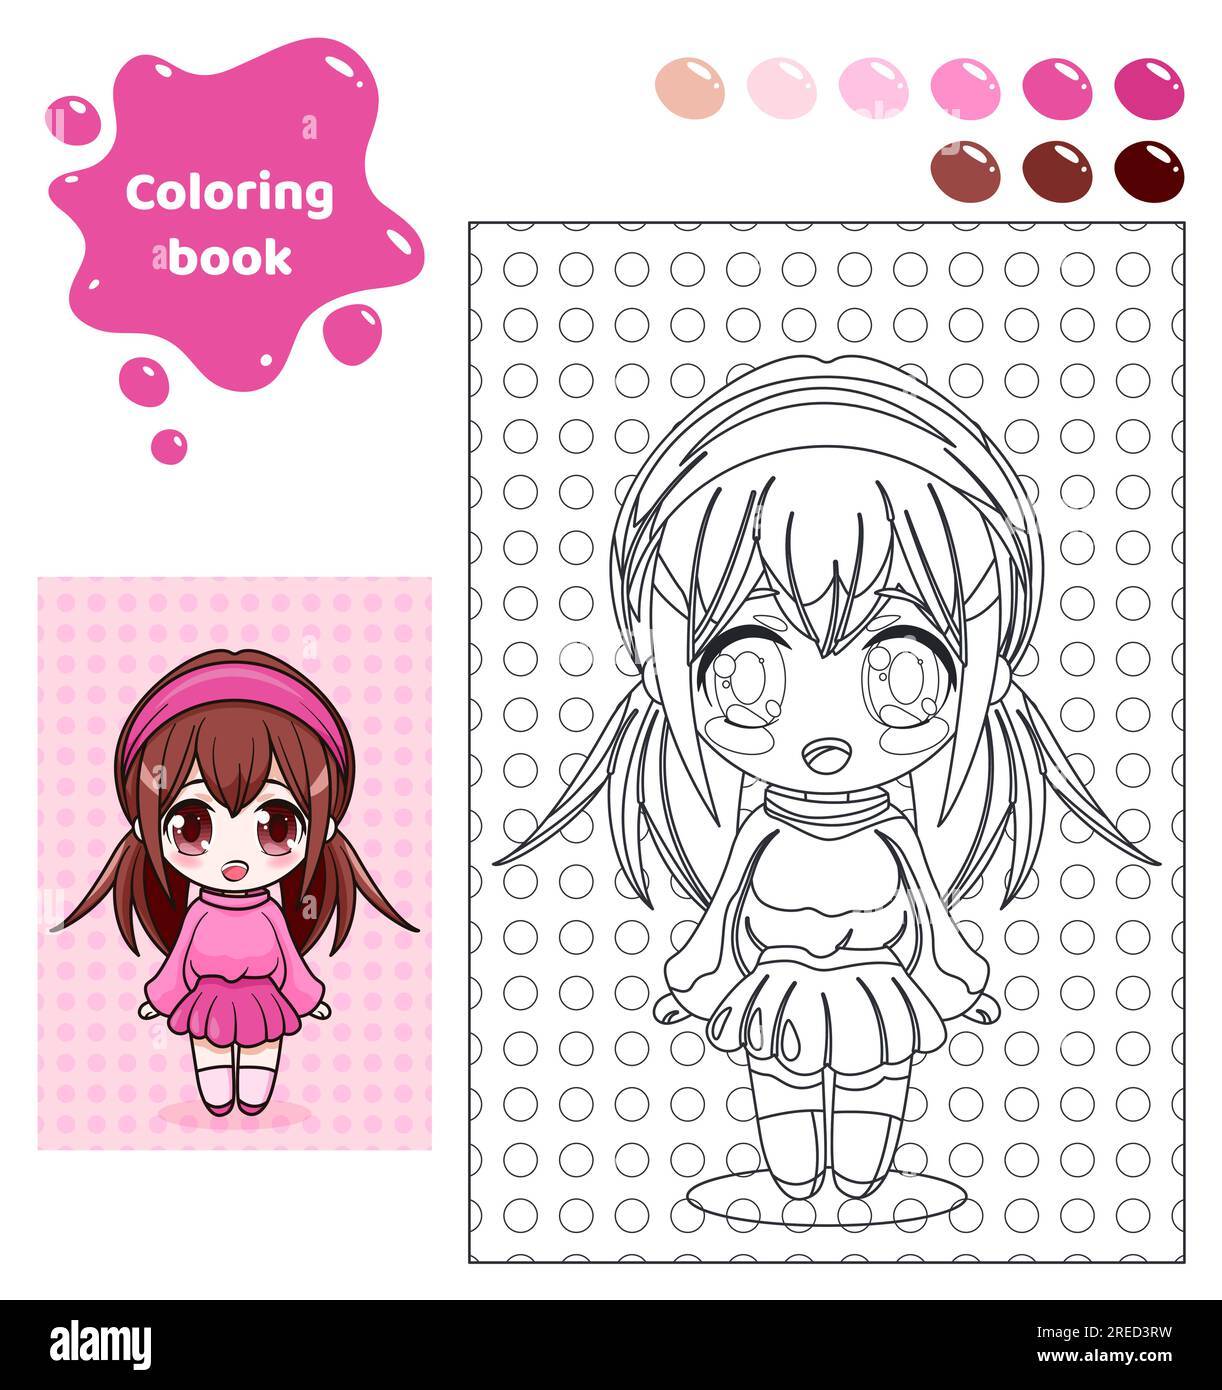 Coloring book for kids. Anime girl in pink skirt. Stock Vector